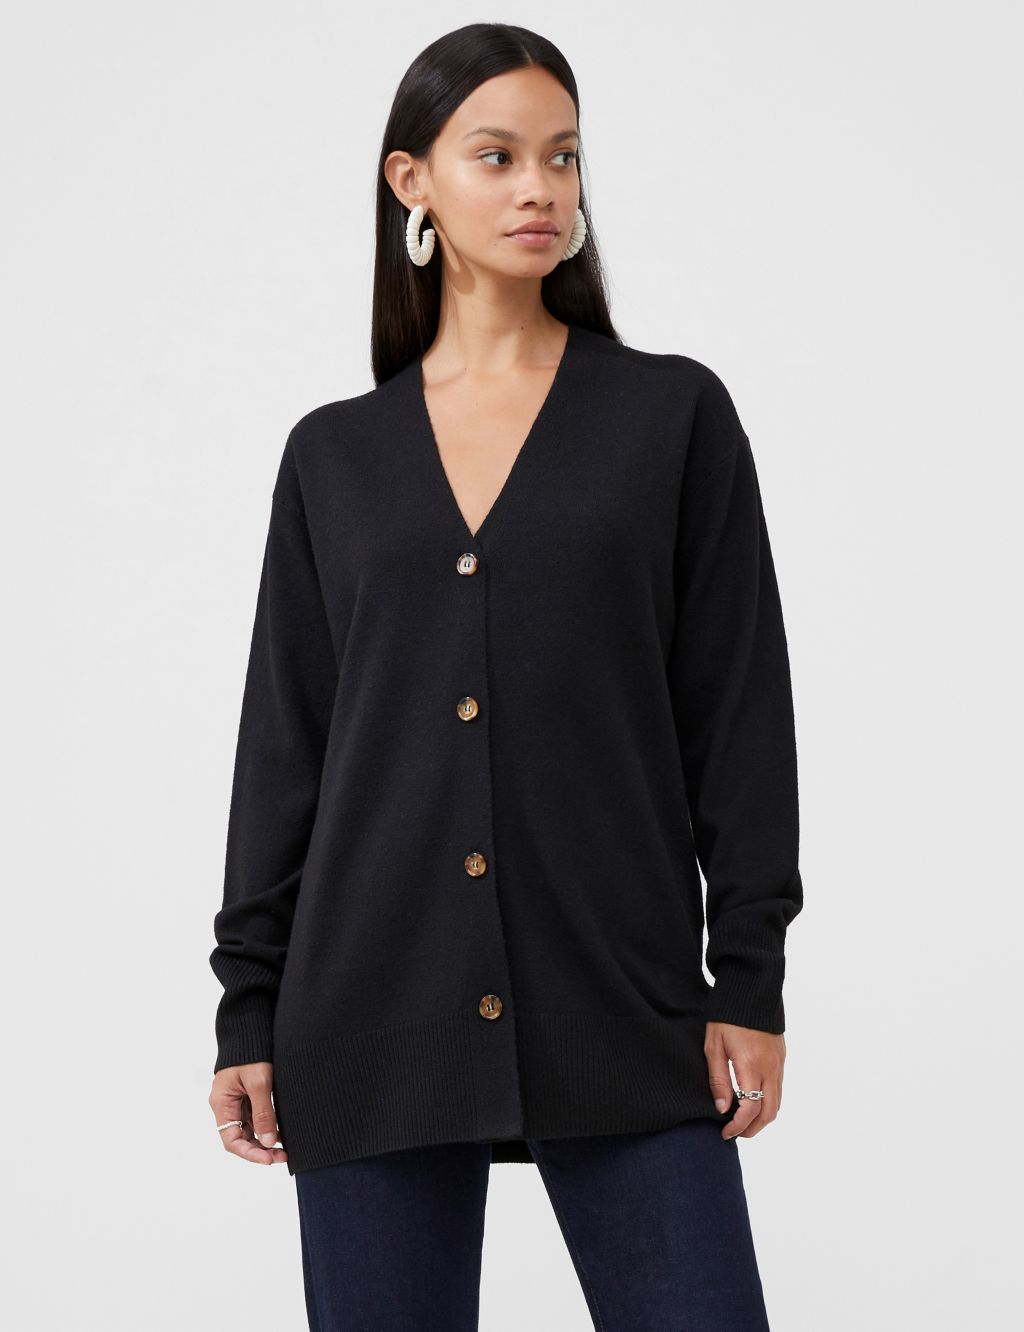 V-Neck Cardigan with Wool | French Connection | M&S